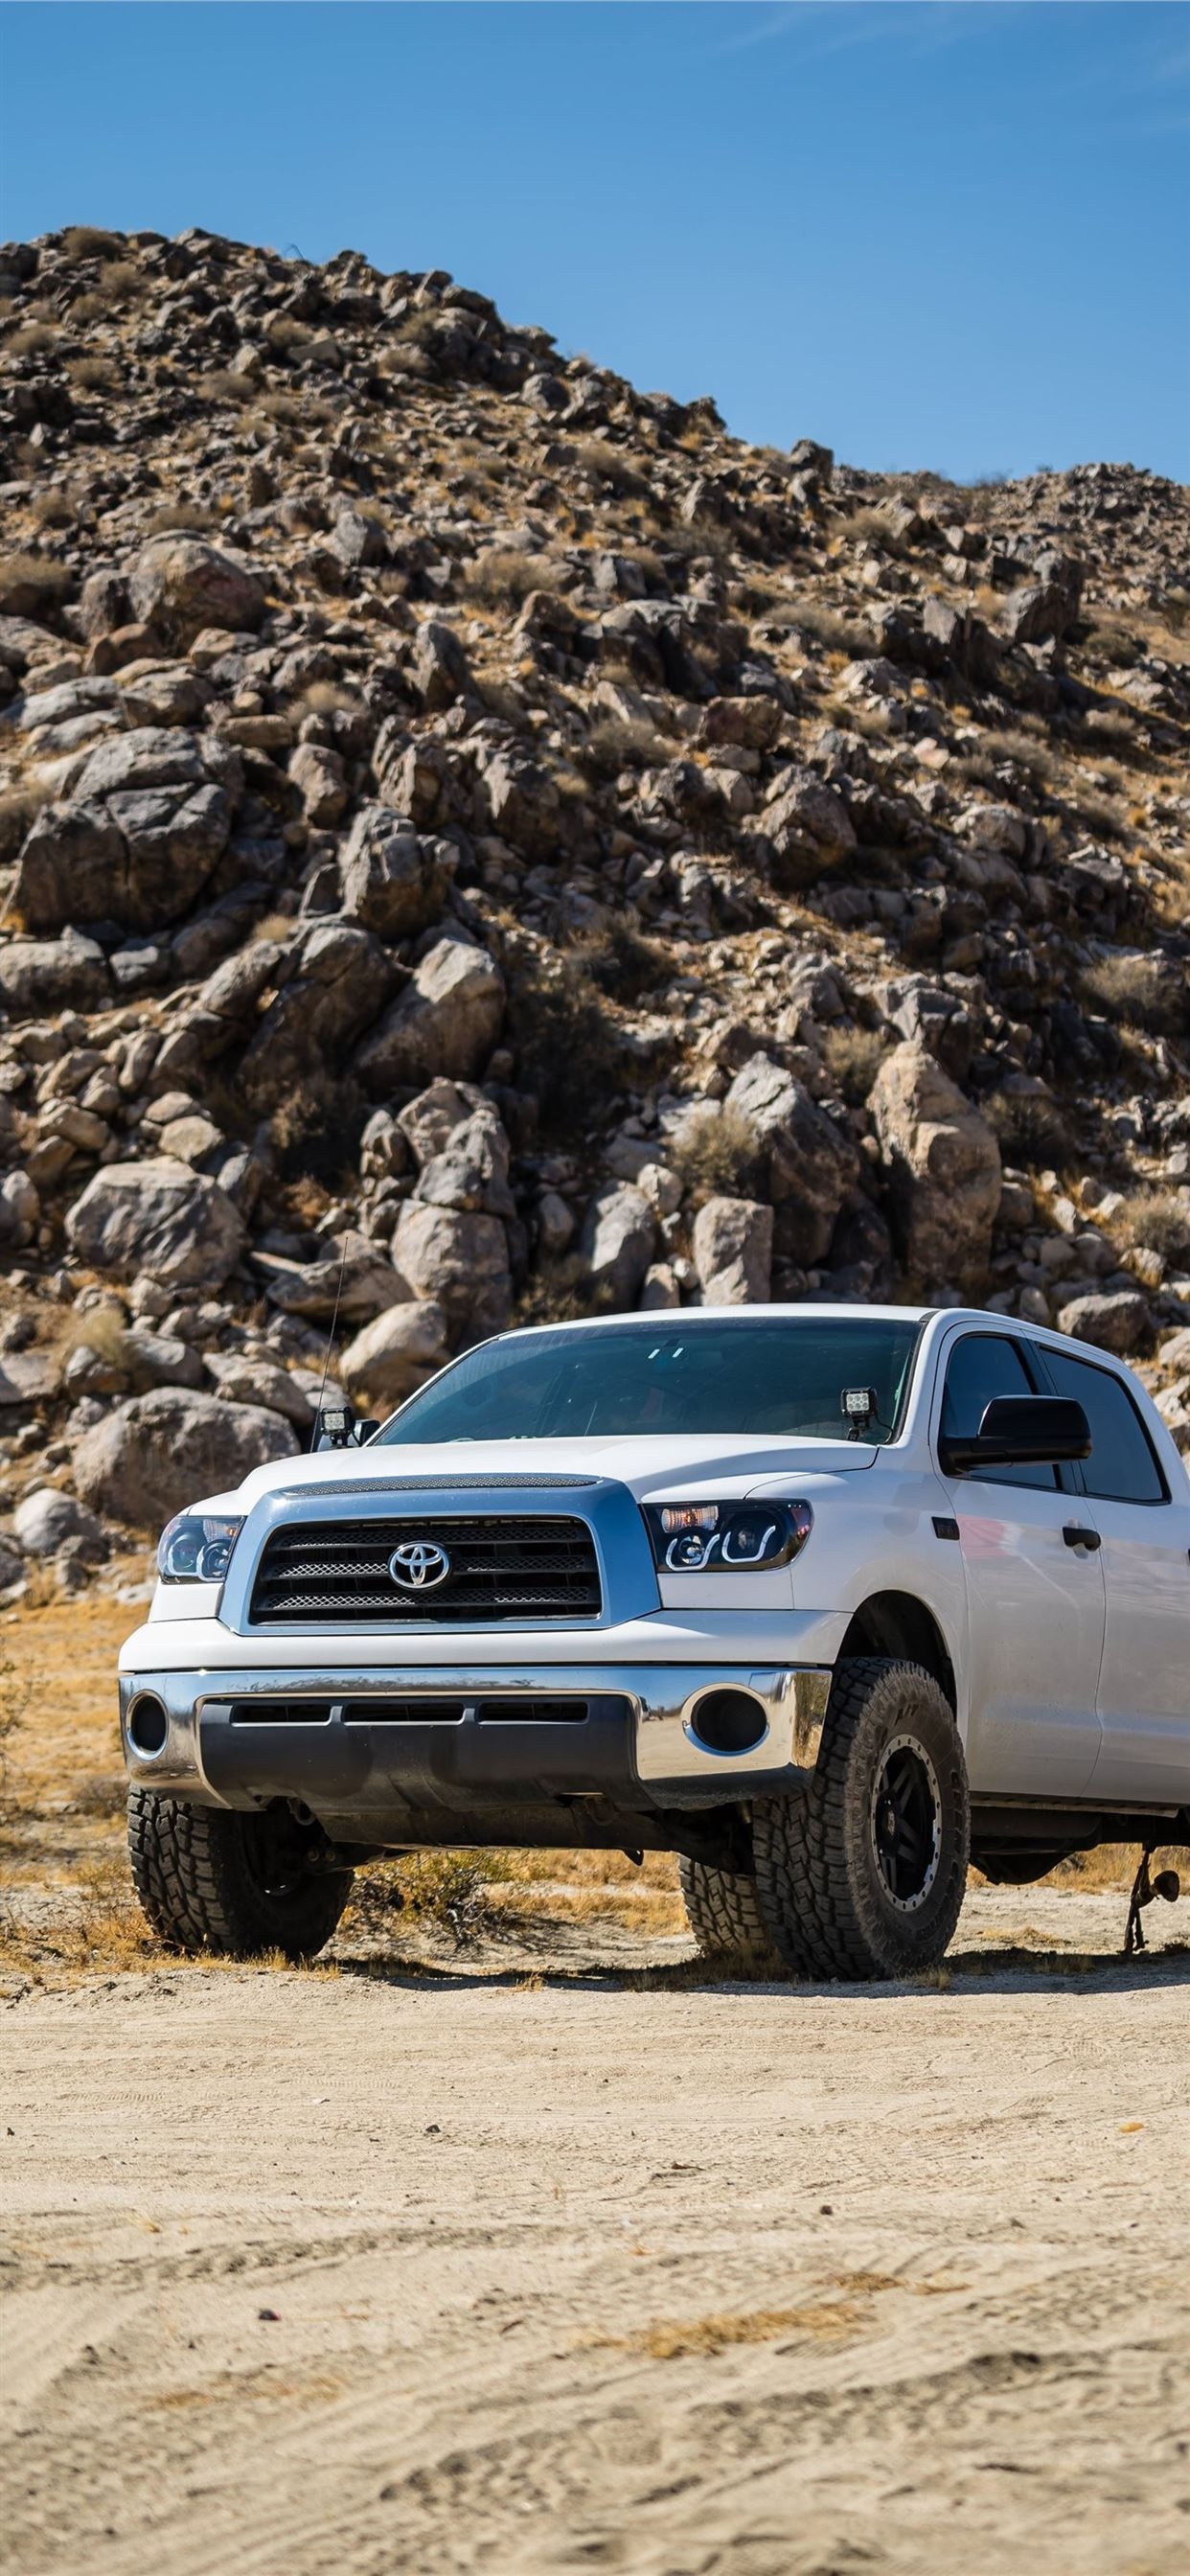 Toyota Tundra, iPhone wallpapers, Free download, Mobile backgrounds, 1250x2690 HD Handy